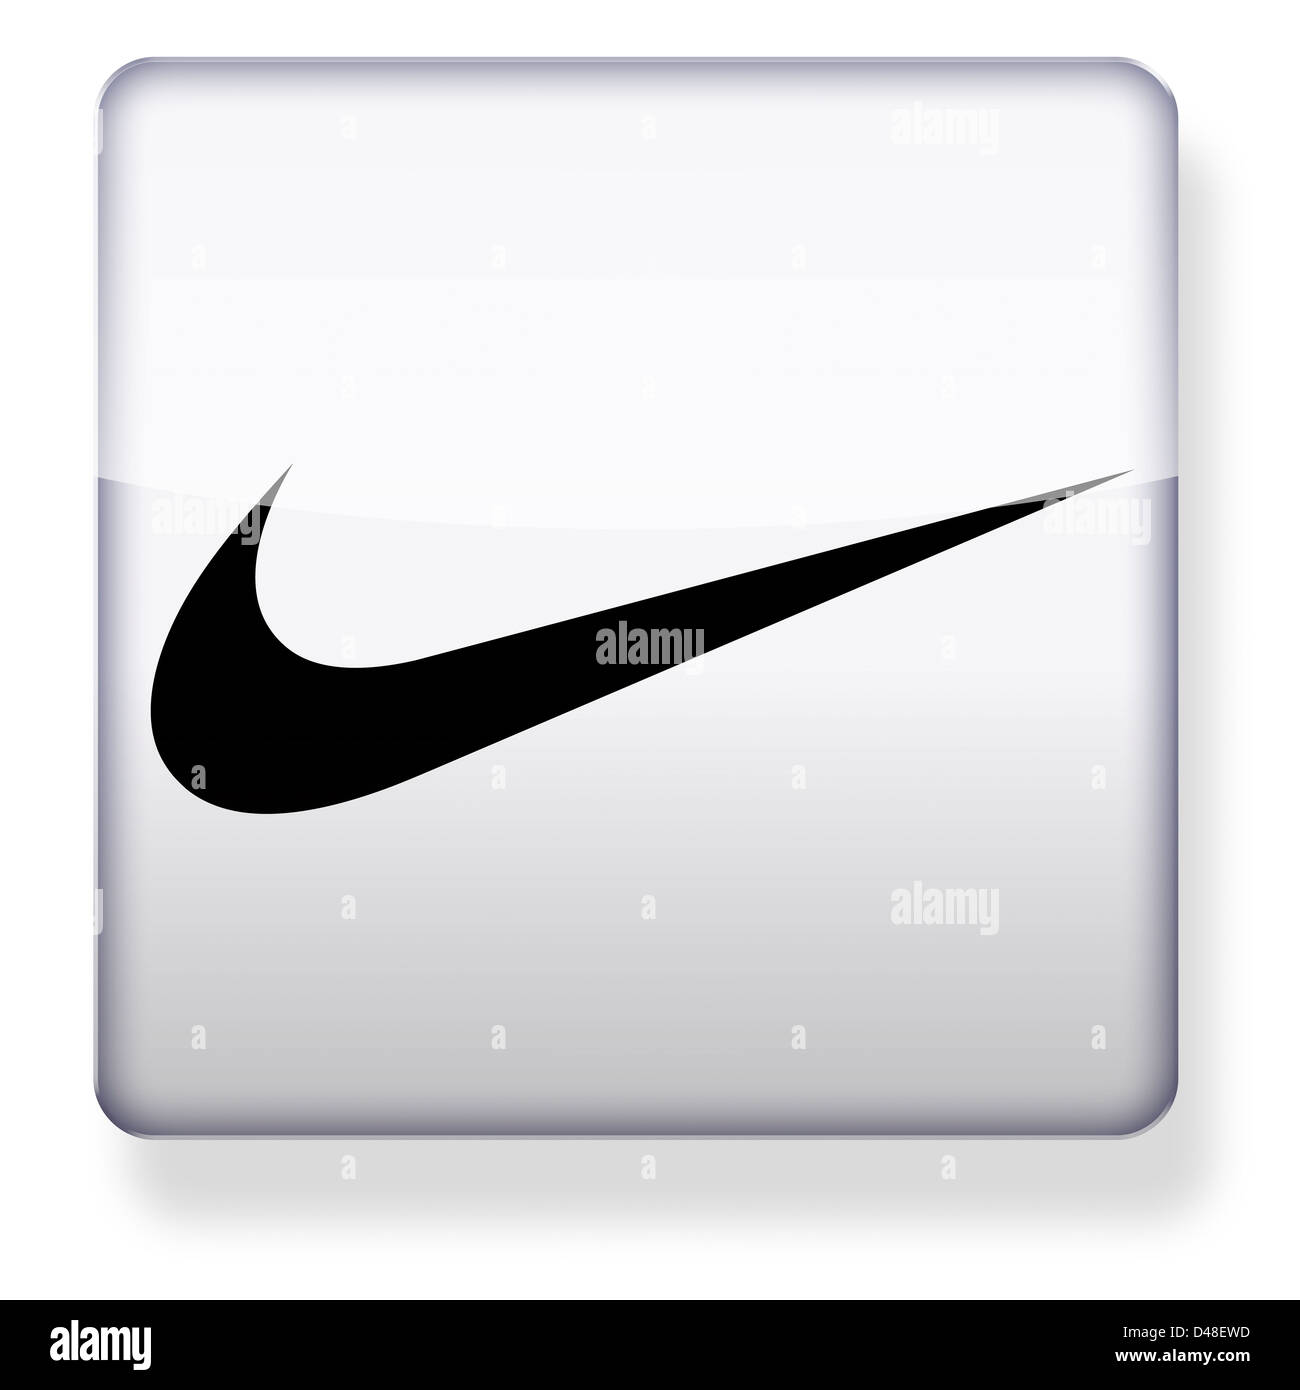 Nike logo as an app icon. Clipping path included. Stock Photo